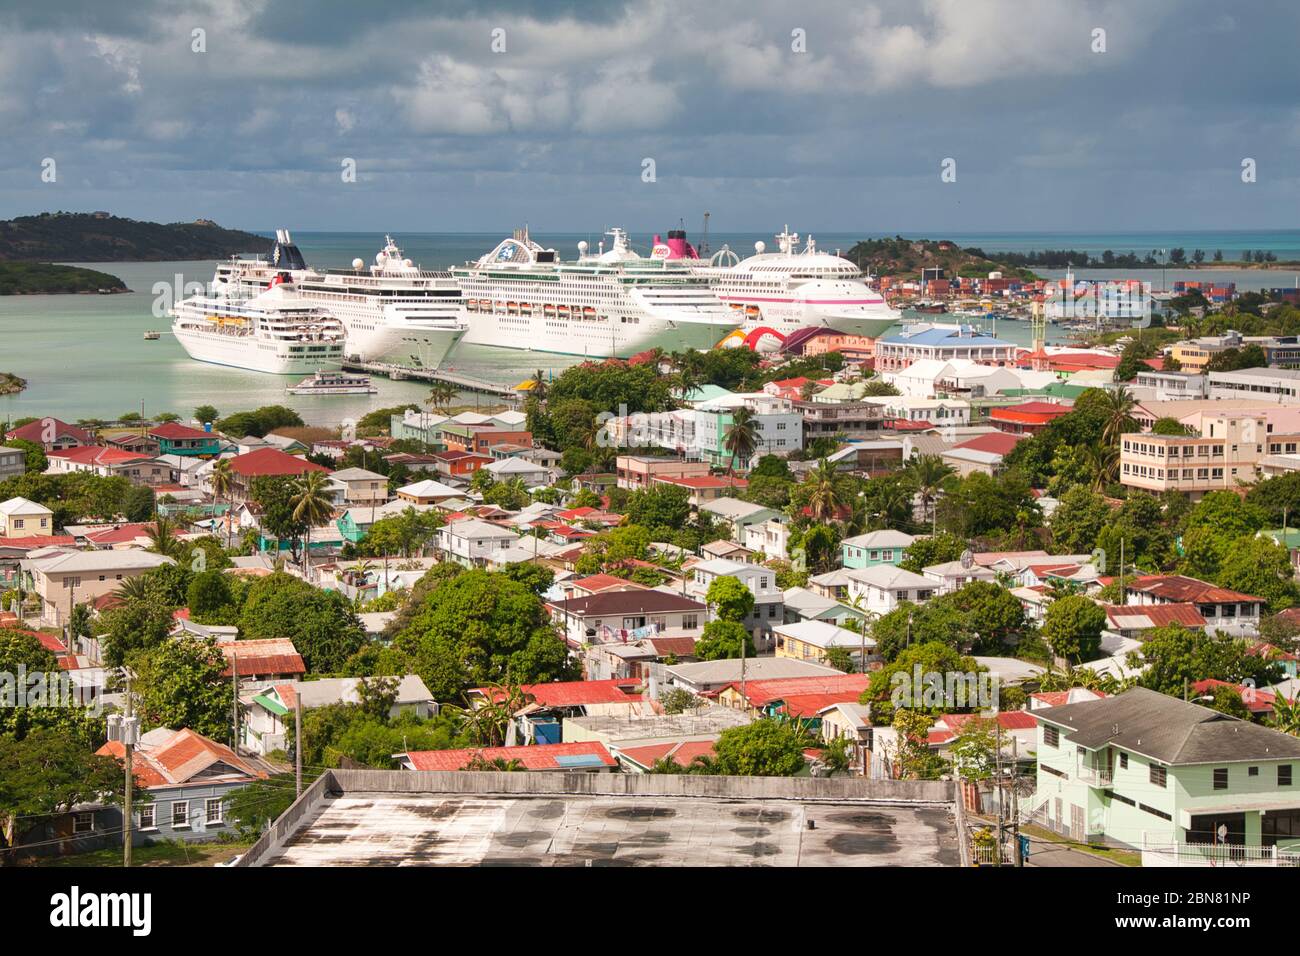 Four cruise ships moored in the harbour at St Johns, Antigua in The Caribbean, West Indies, seeming to dominate the town by their size Stock Photo